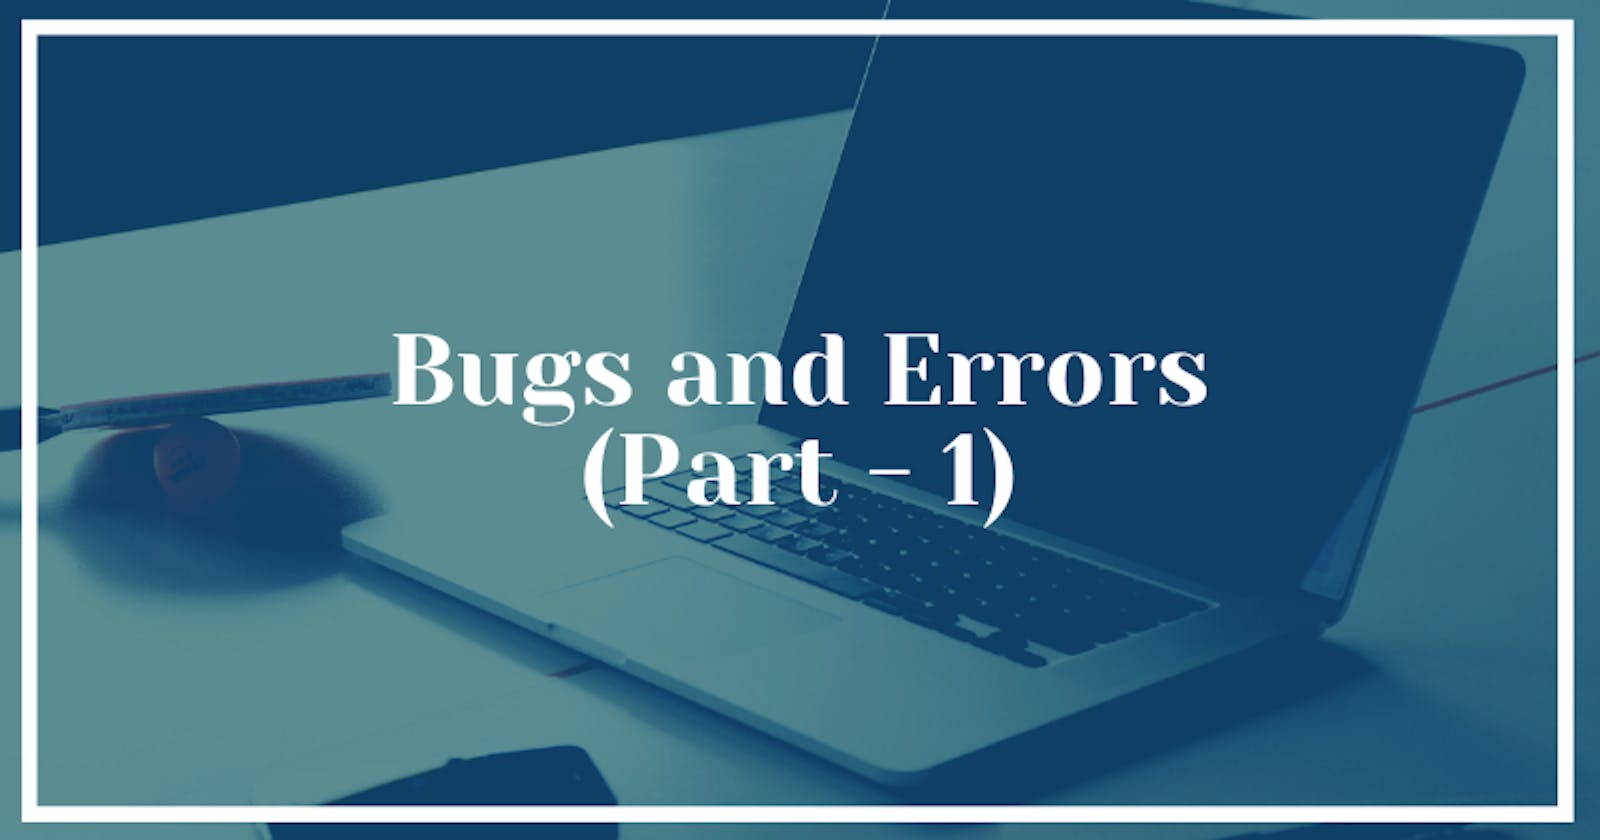 Bugs and Errors